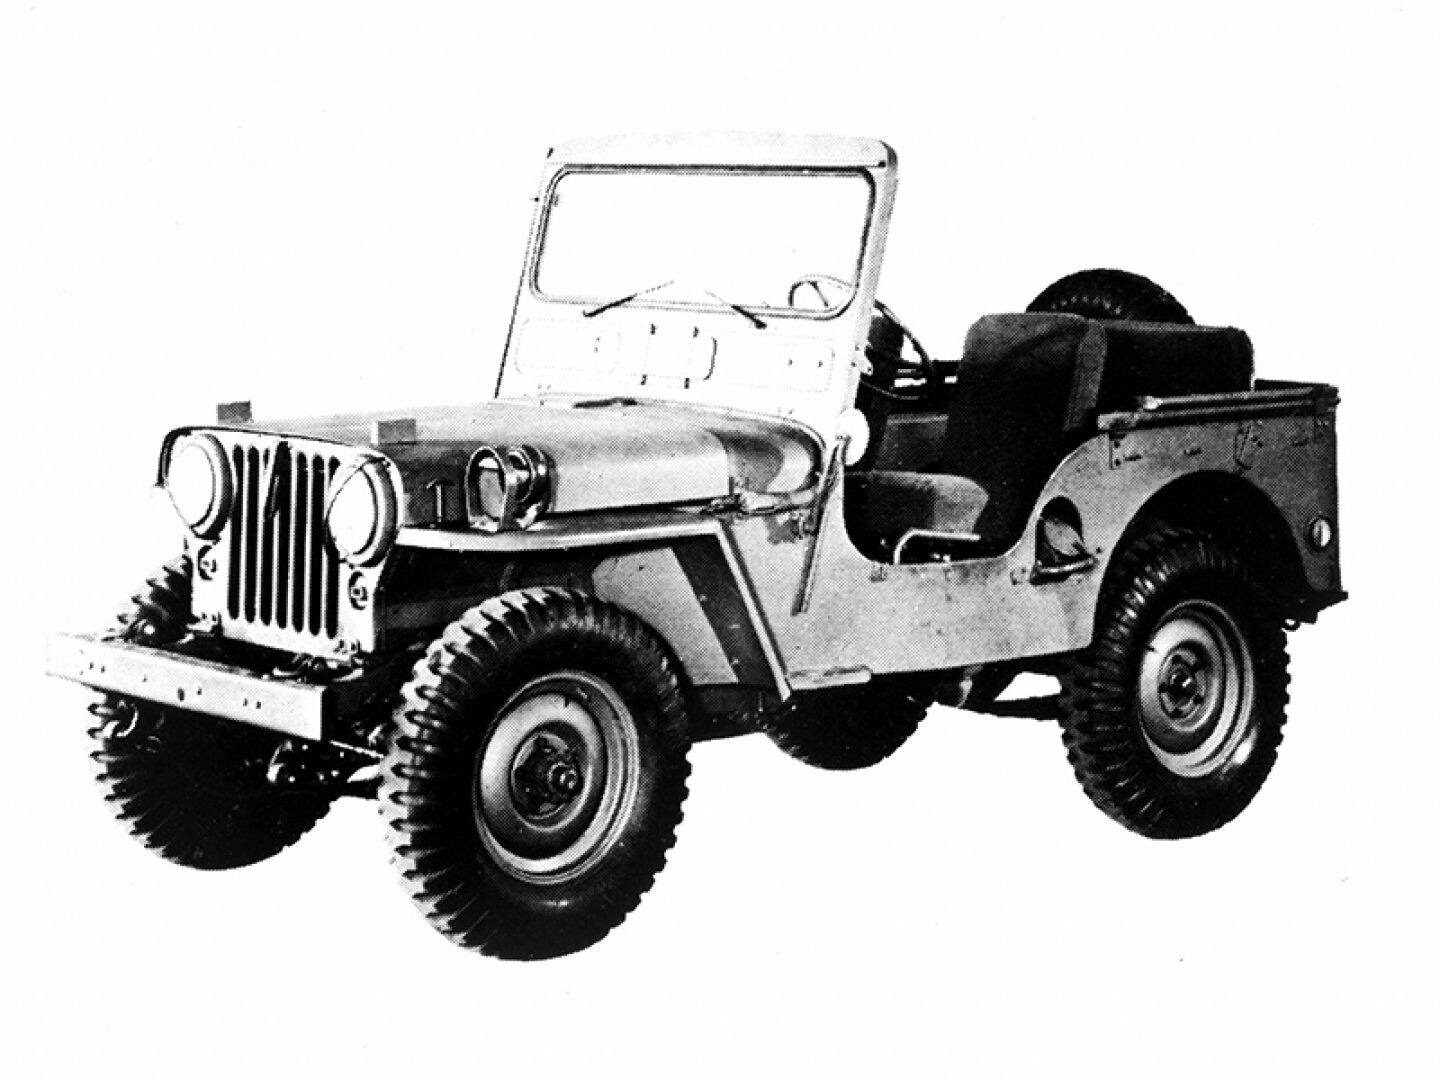 1950s - Jeep History | The Story Of The Legend | Jeep® UK